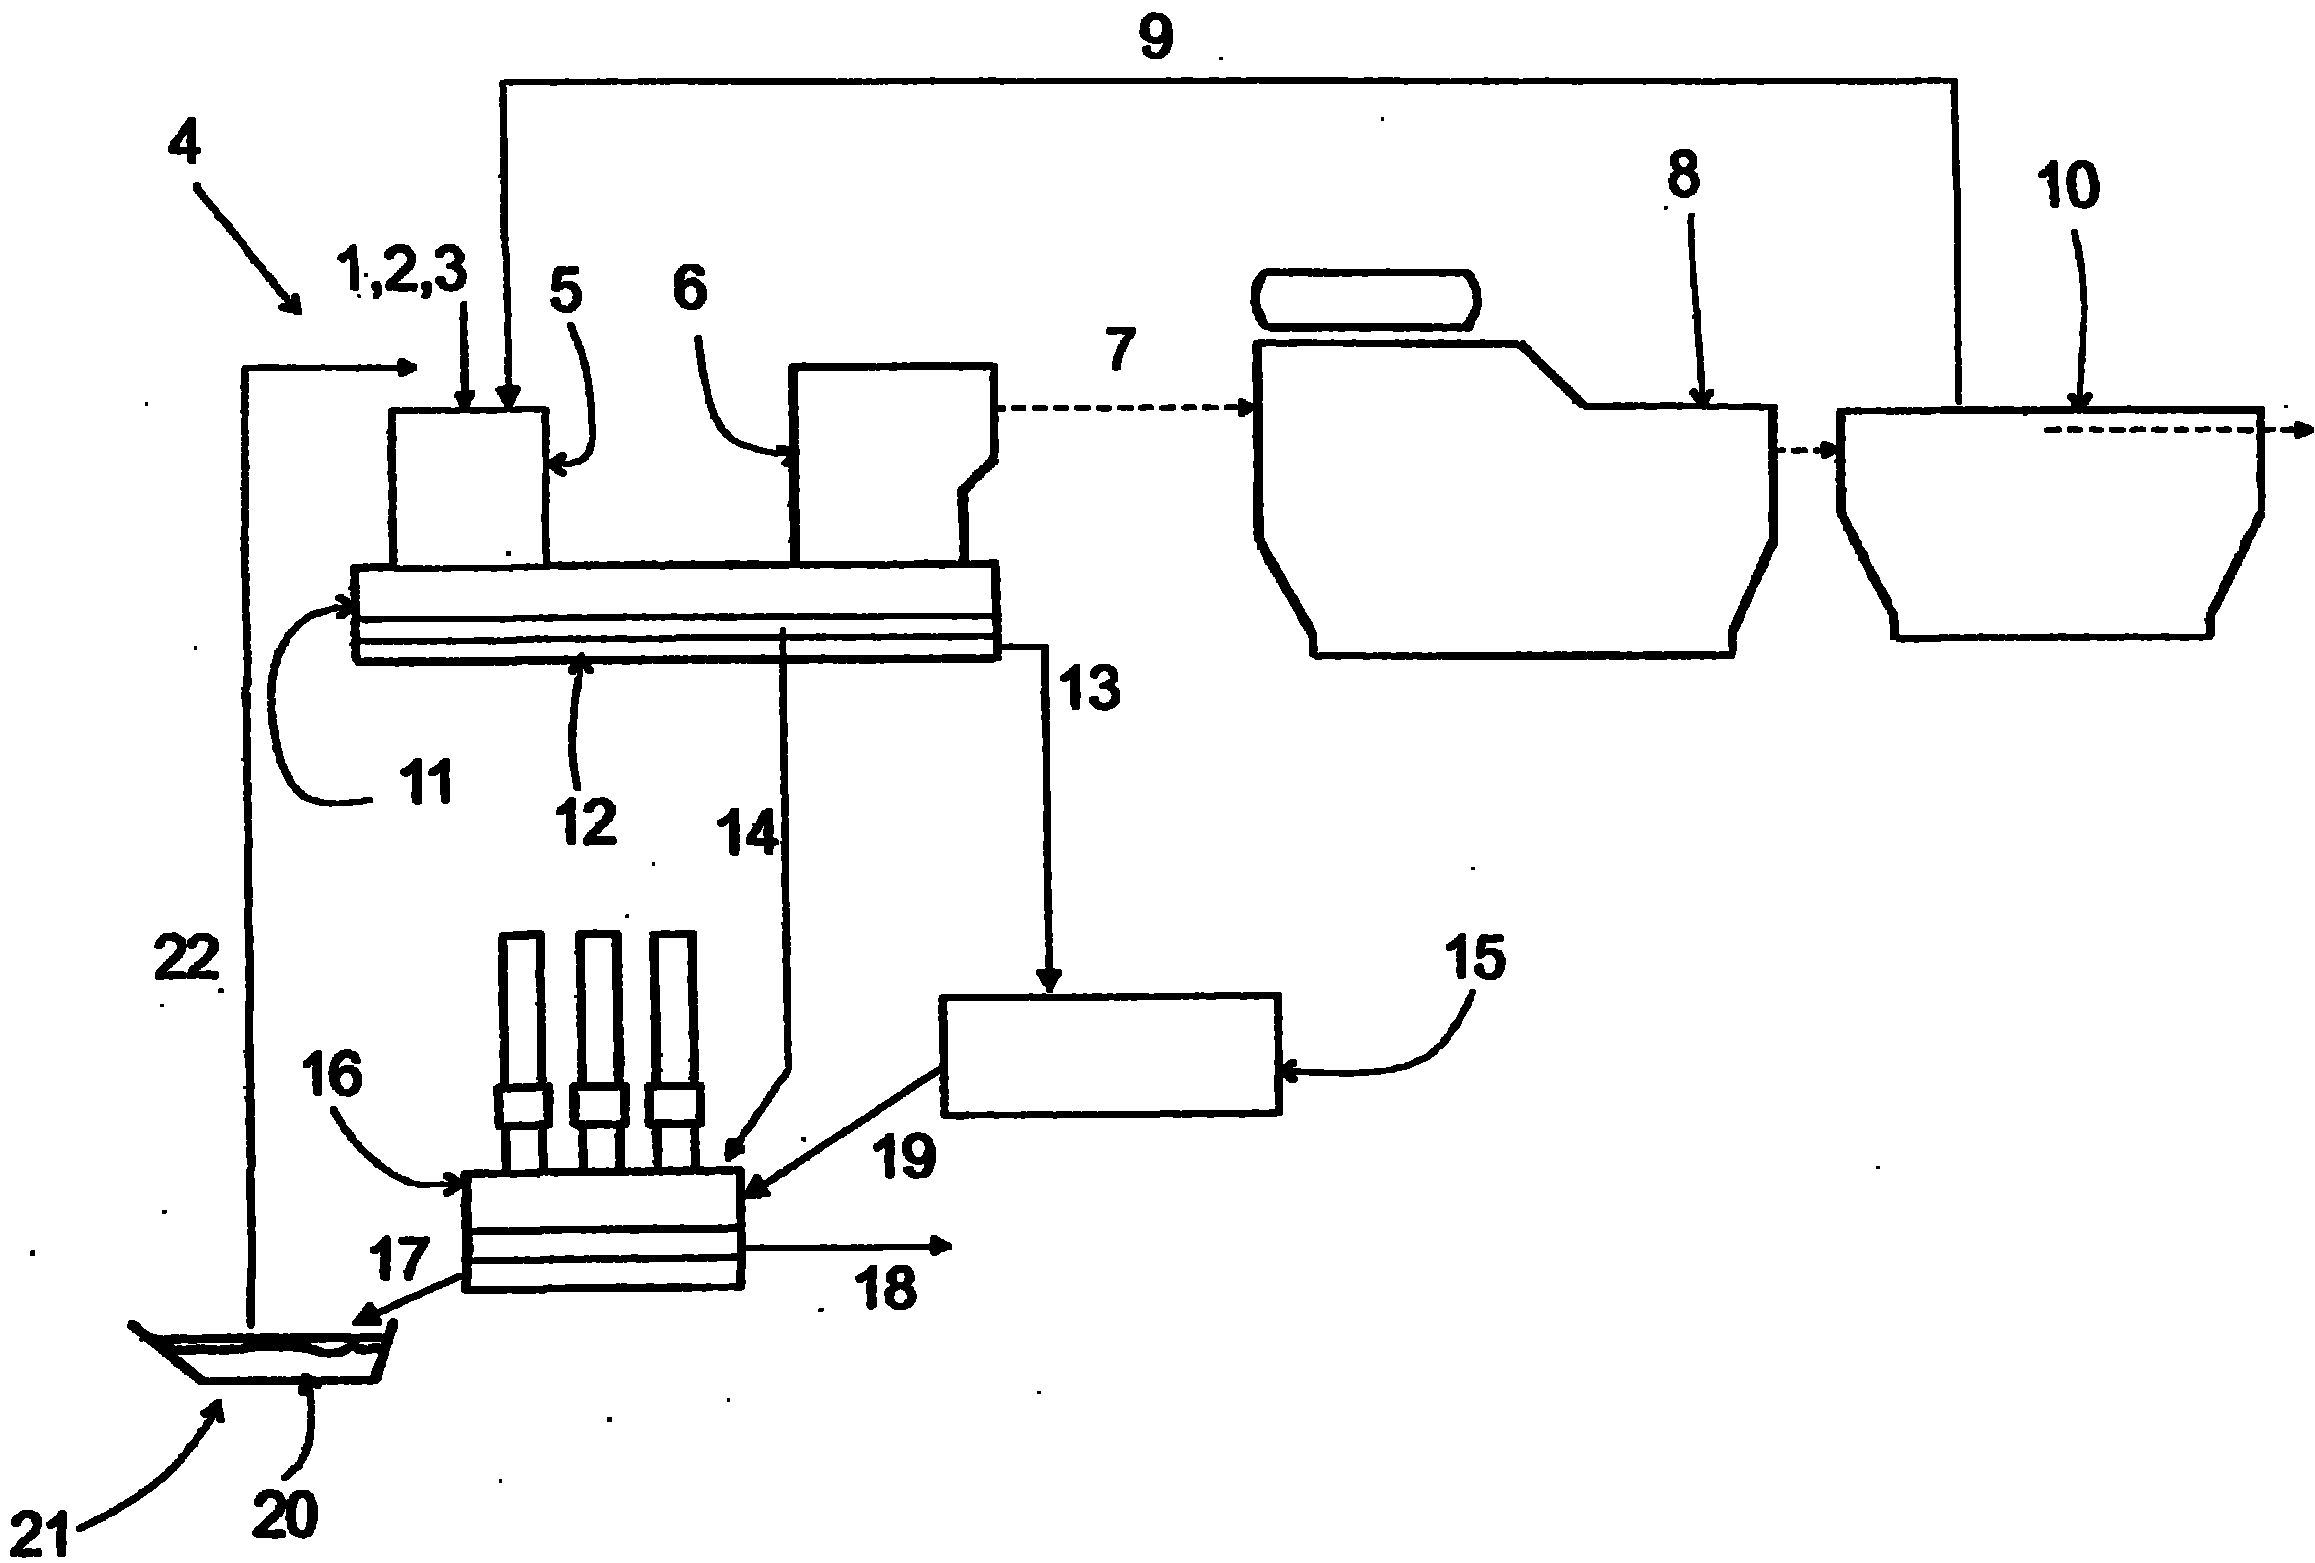 Method for refining copper concentrate